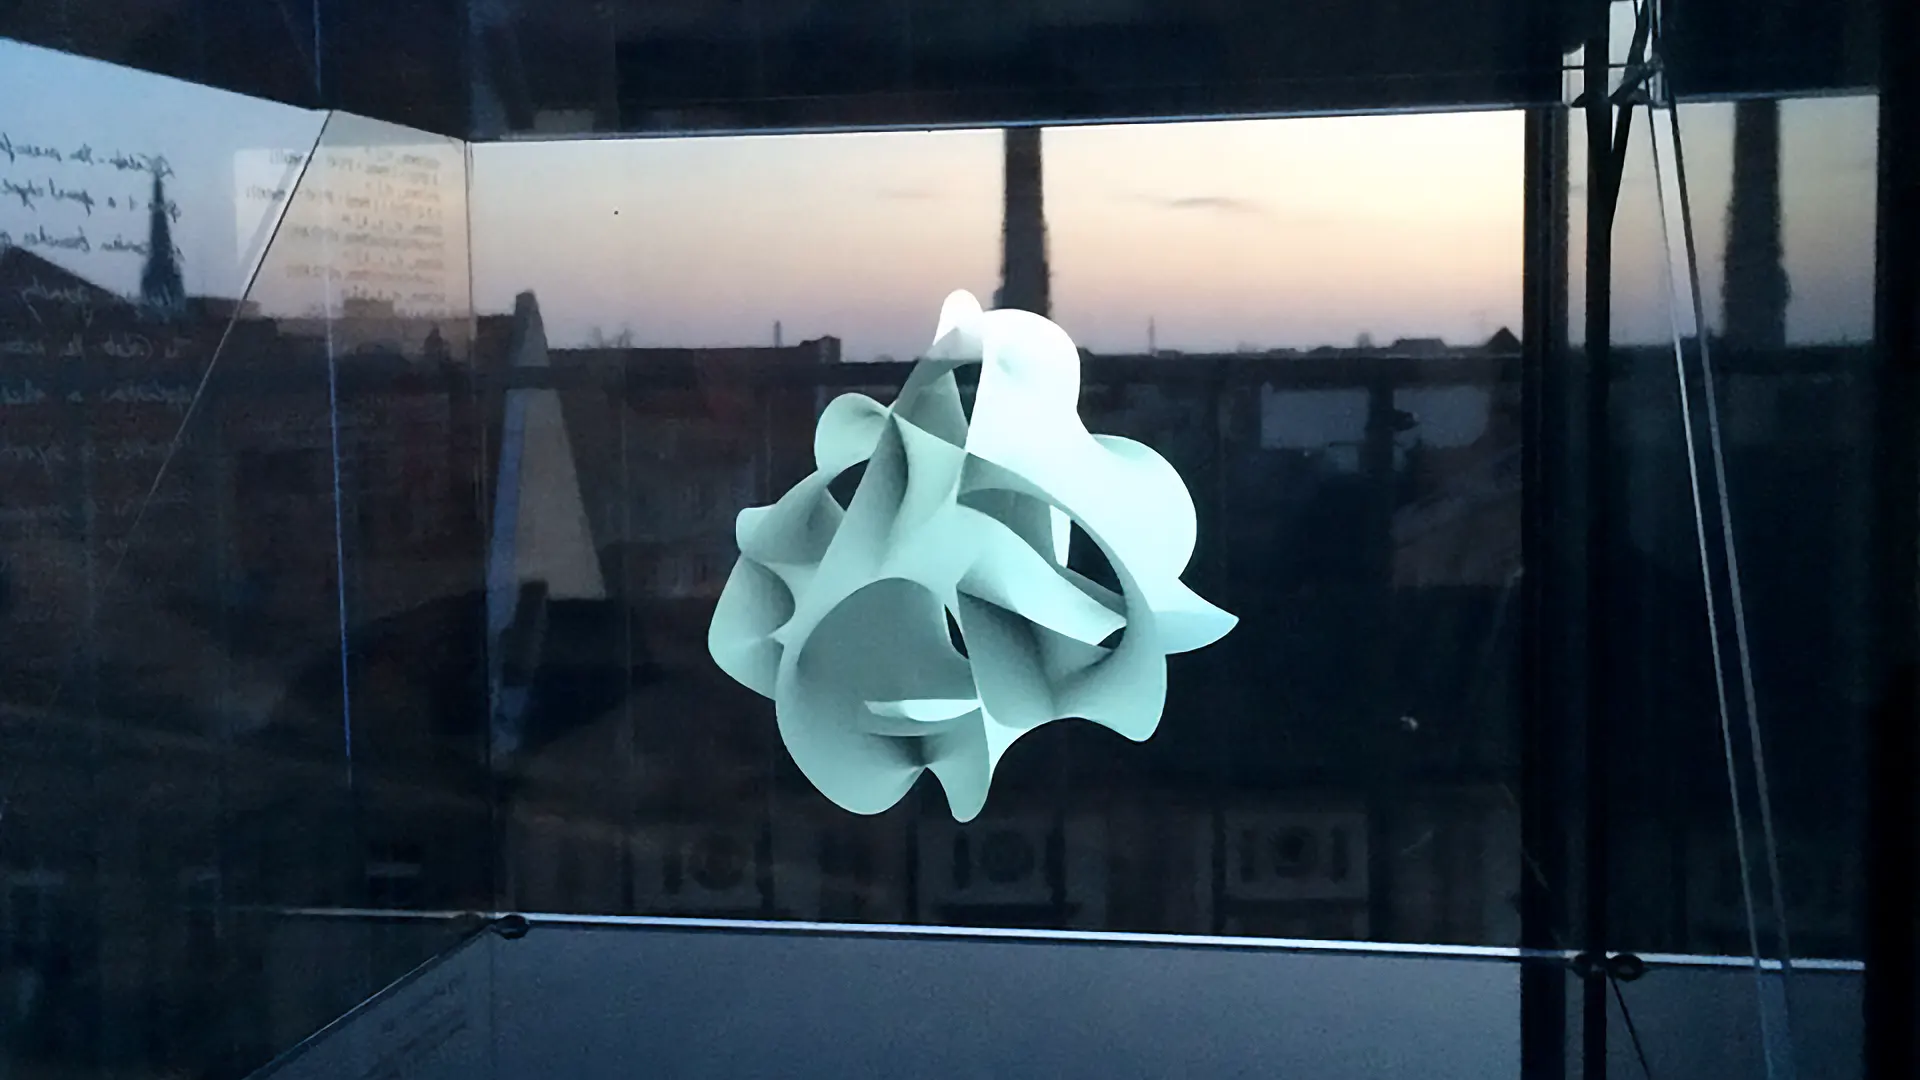 A projected mathematical spherical shape inside a glass cube in front of the Berlin skyline.